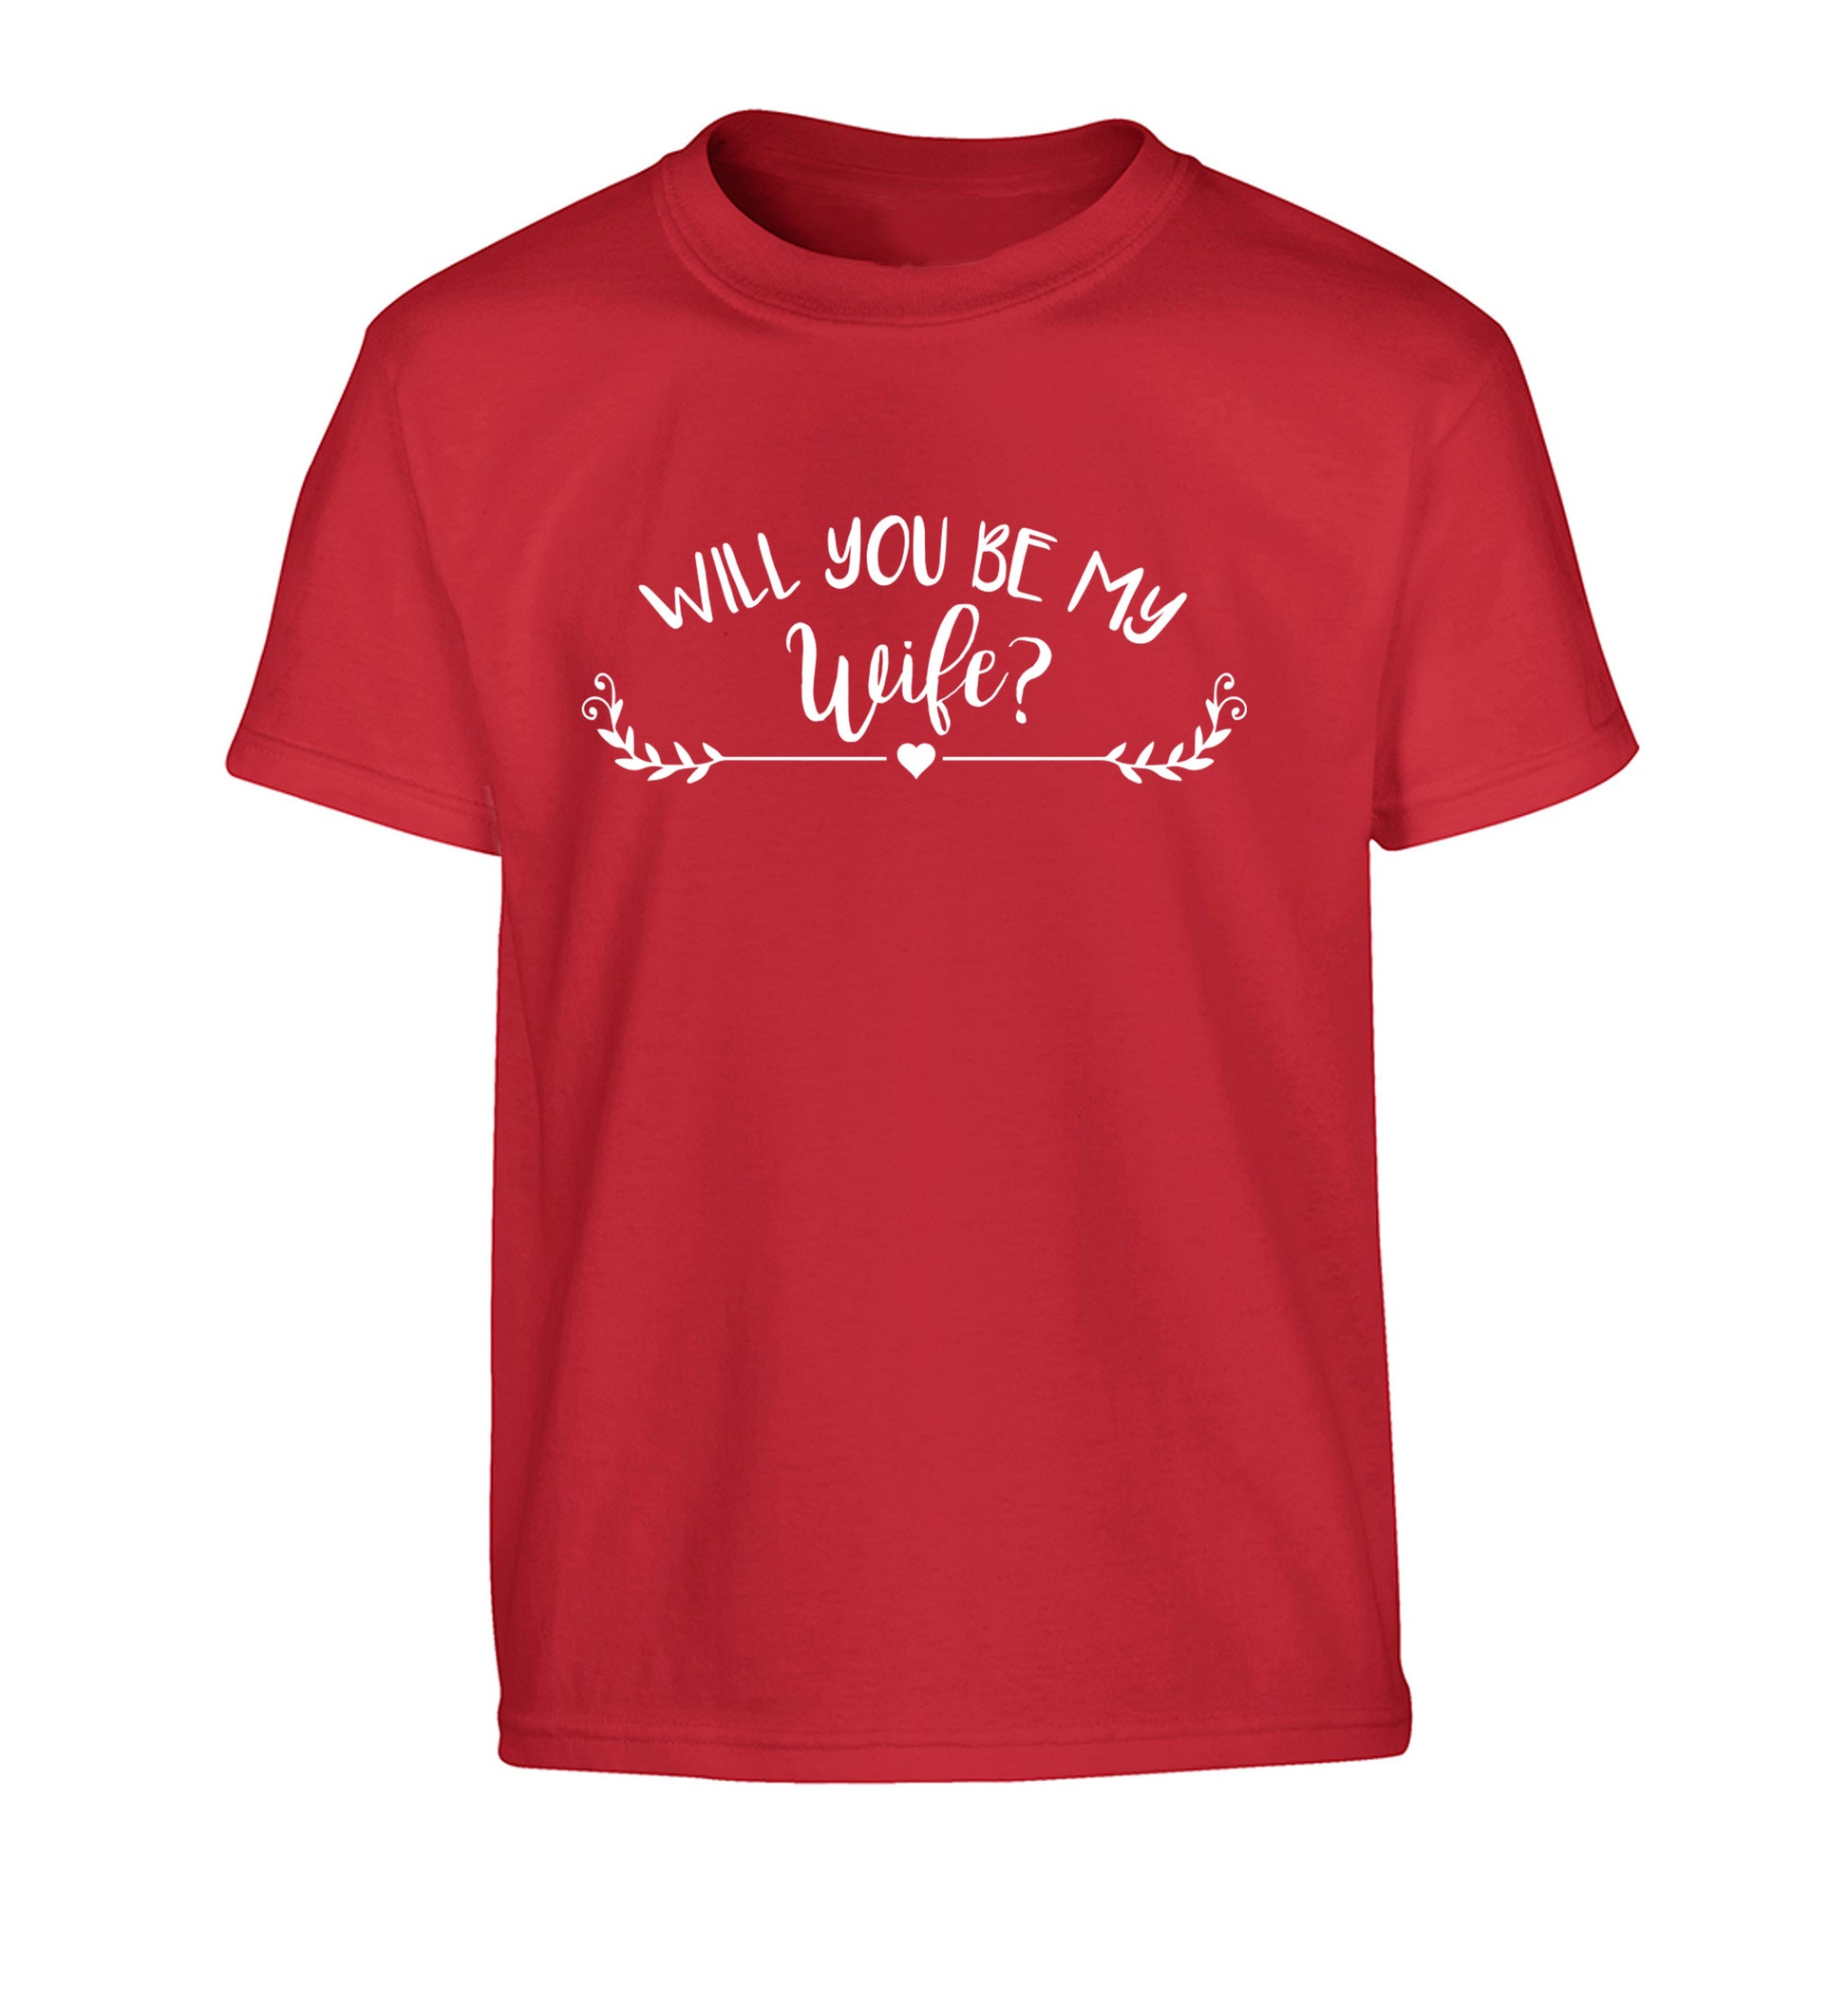 Will you be my wife? Children's red Tshirt 12-14 Years